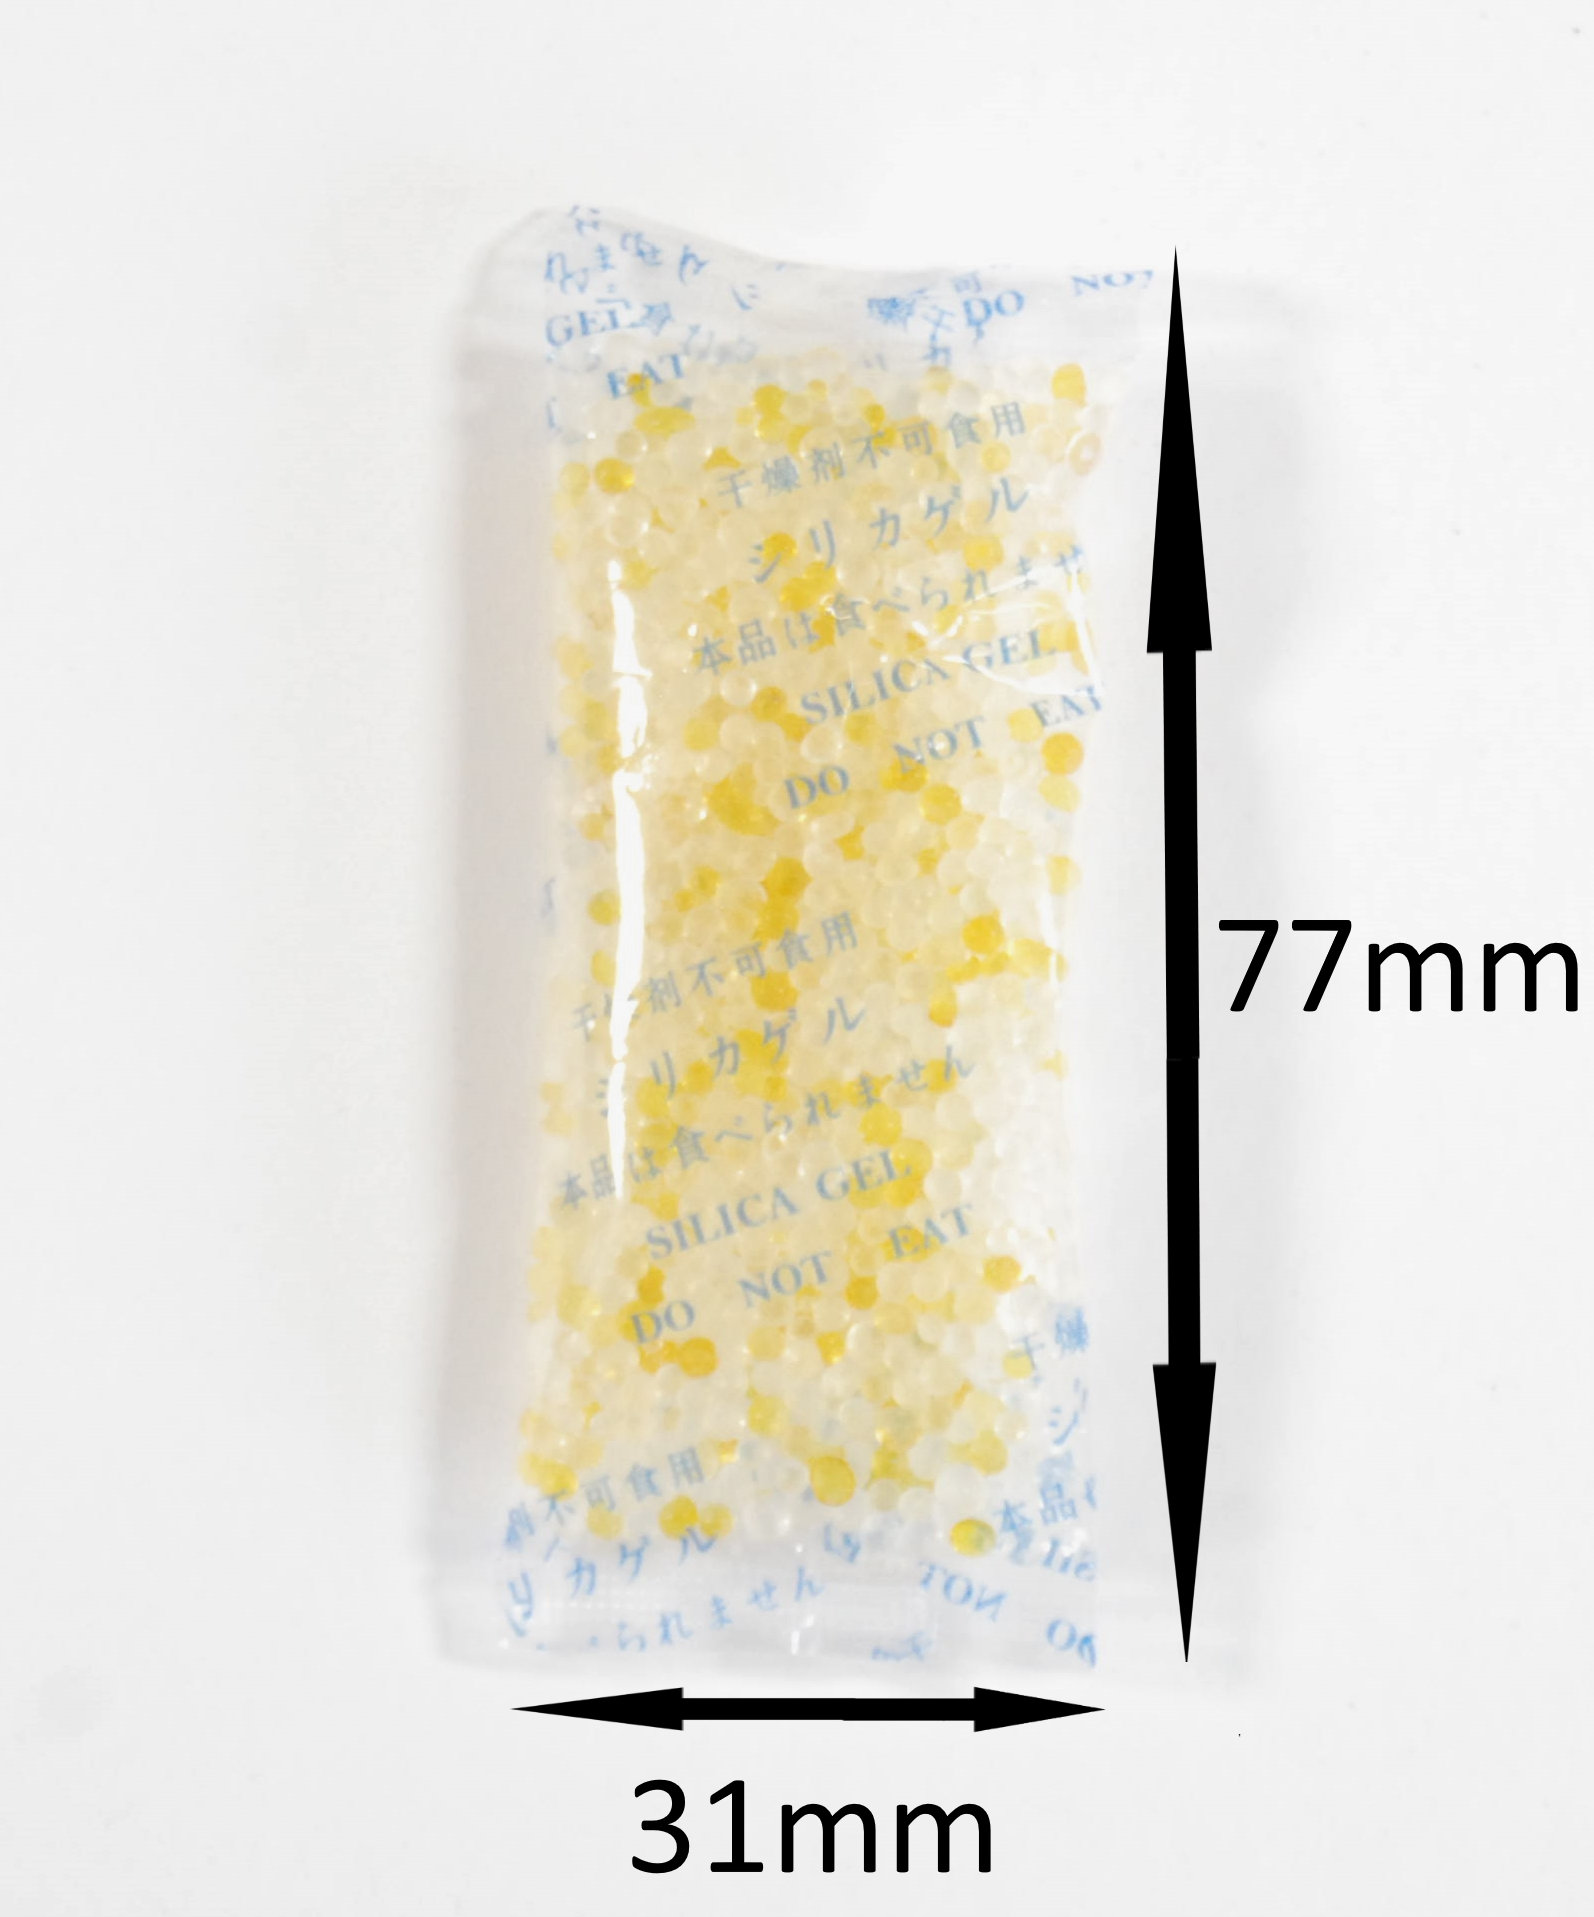 Buy 10g SELF INDICATING YELLOW Silica Gel Pouches Sachets Moisture Absorber  Online in India 